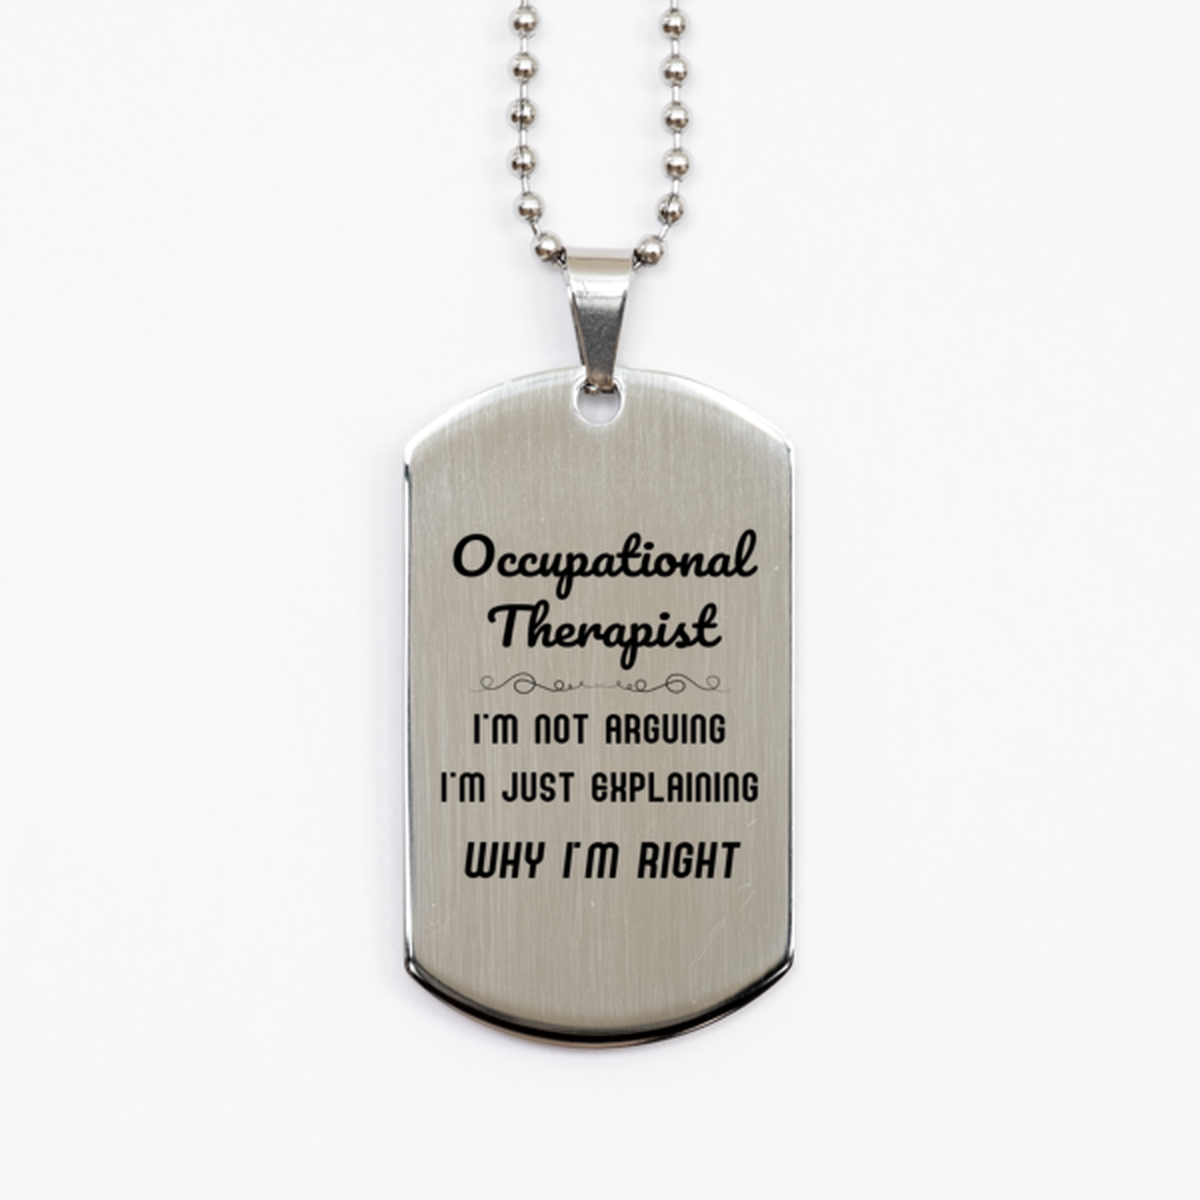 Occupational Therapist I'm not Arguing. I'm Just Explaining Why I'm RIGHT Silver Dog Tag, Funny Saying Quote Occupational Therapist Gifts For Occupational Therapist Graduation Birthday Christmas Gifts for Men Women Coworker